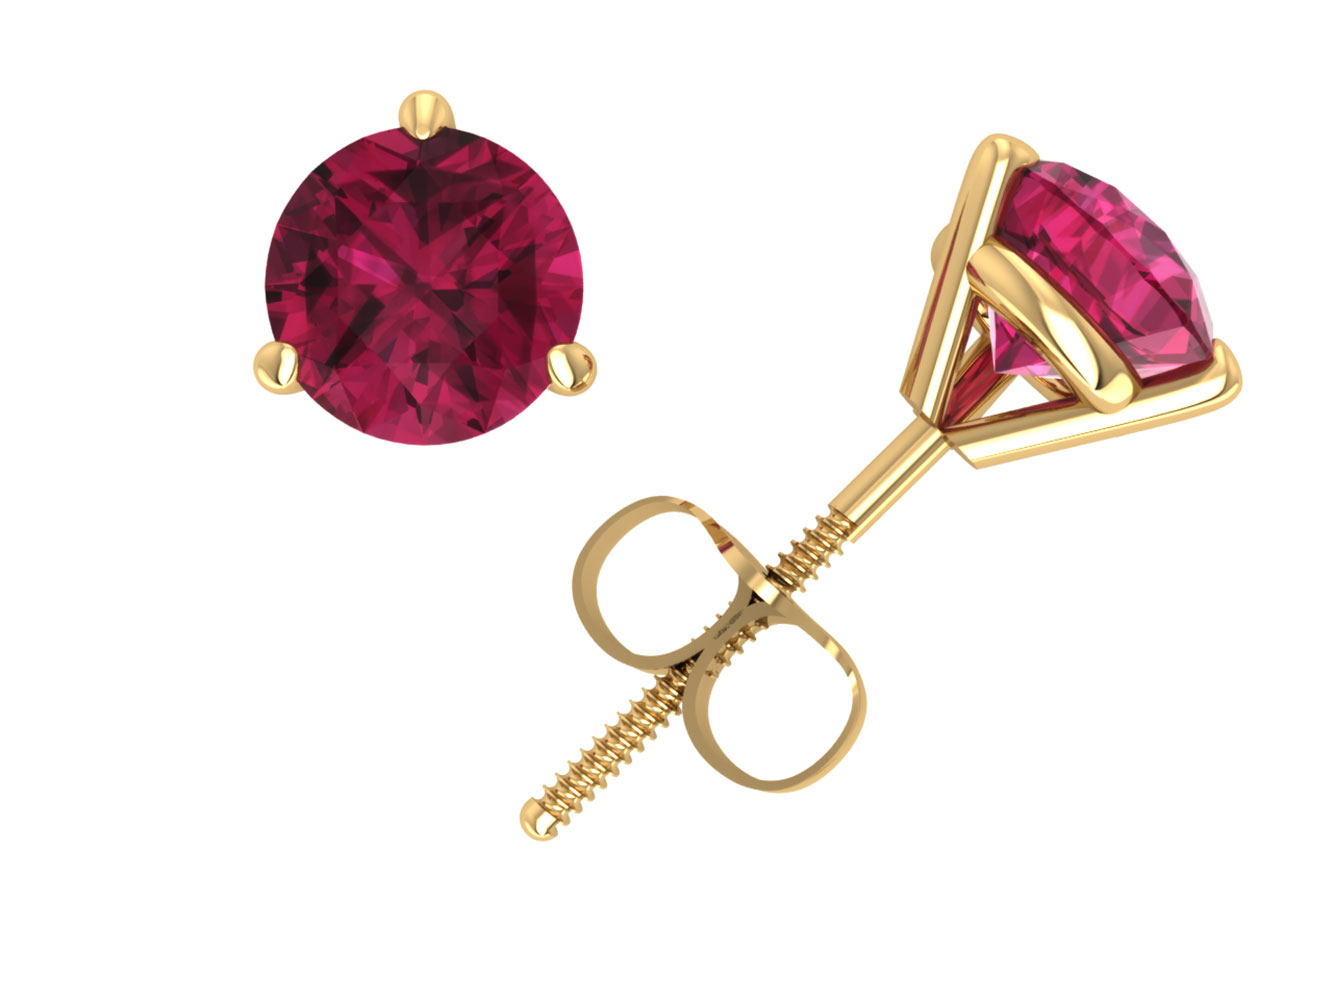 Jewel We Sell 1.25Ct Round Cut Pink Sapphire Martini Stud Earrings 14k White or Yellow Gold 3Prong AAA Quality